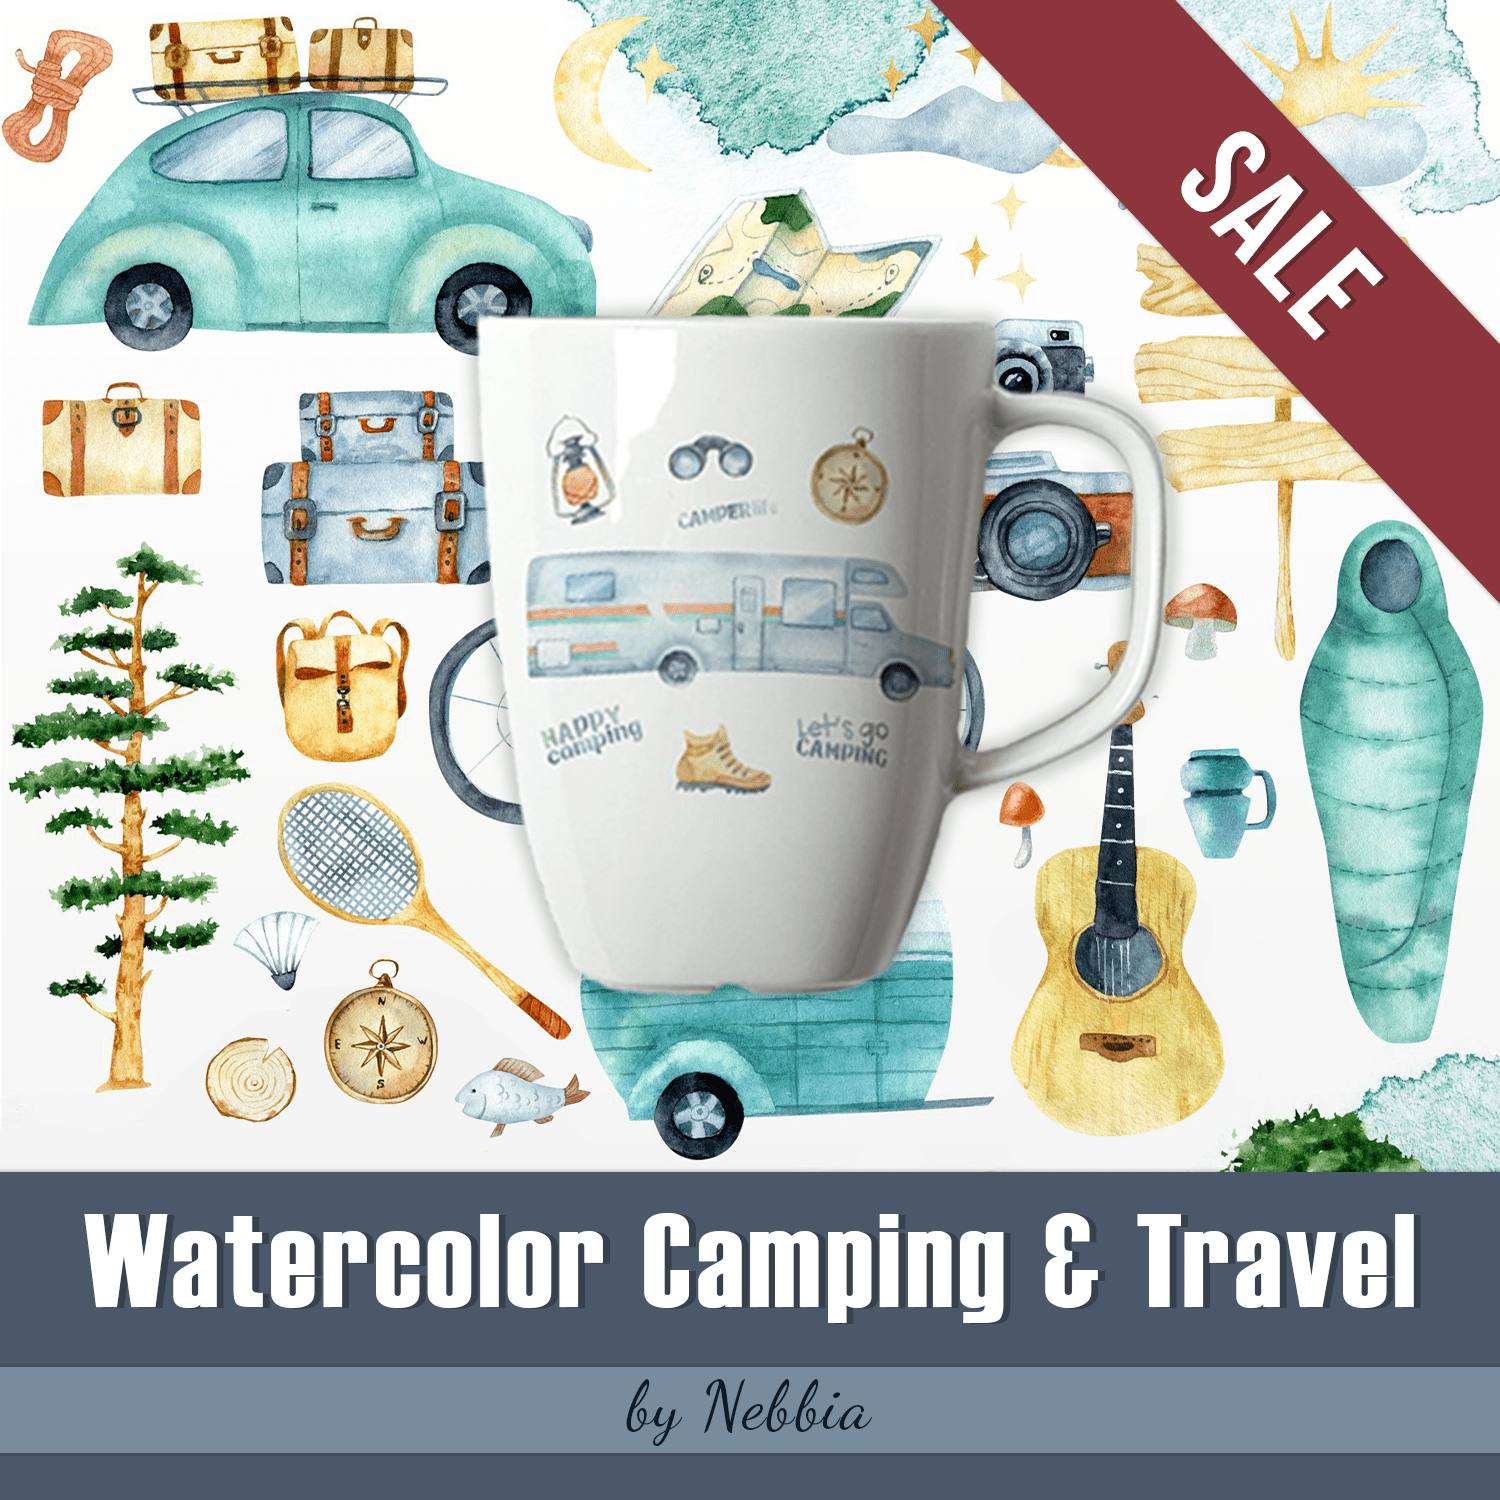 SALE. Watercolor Camping & Travel cover.